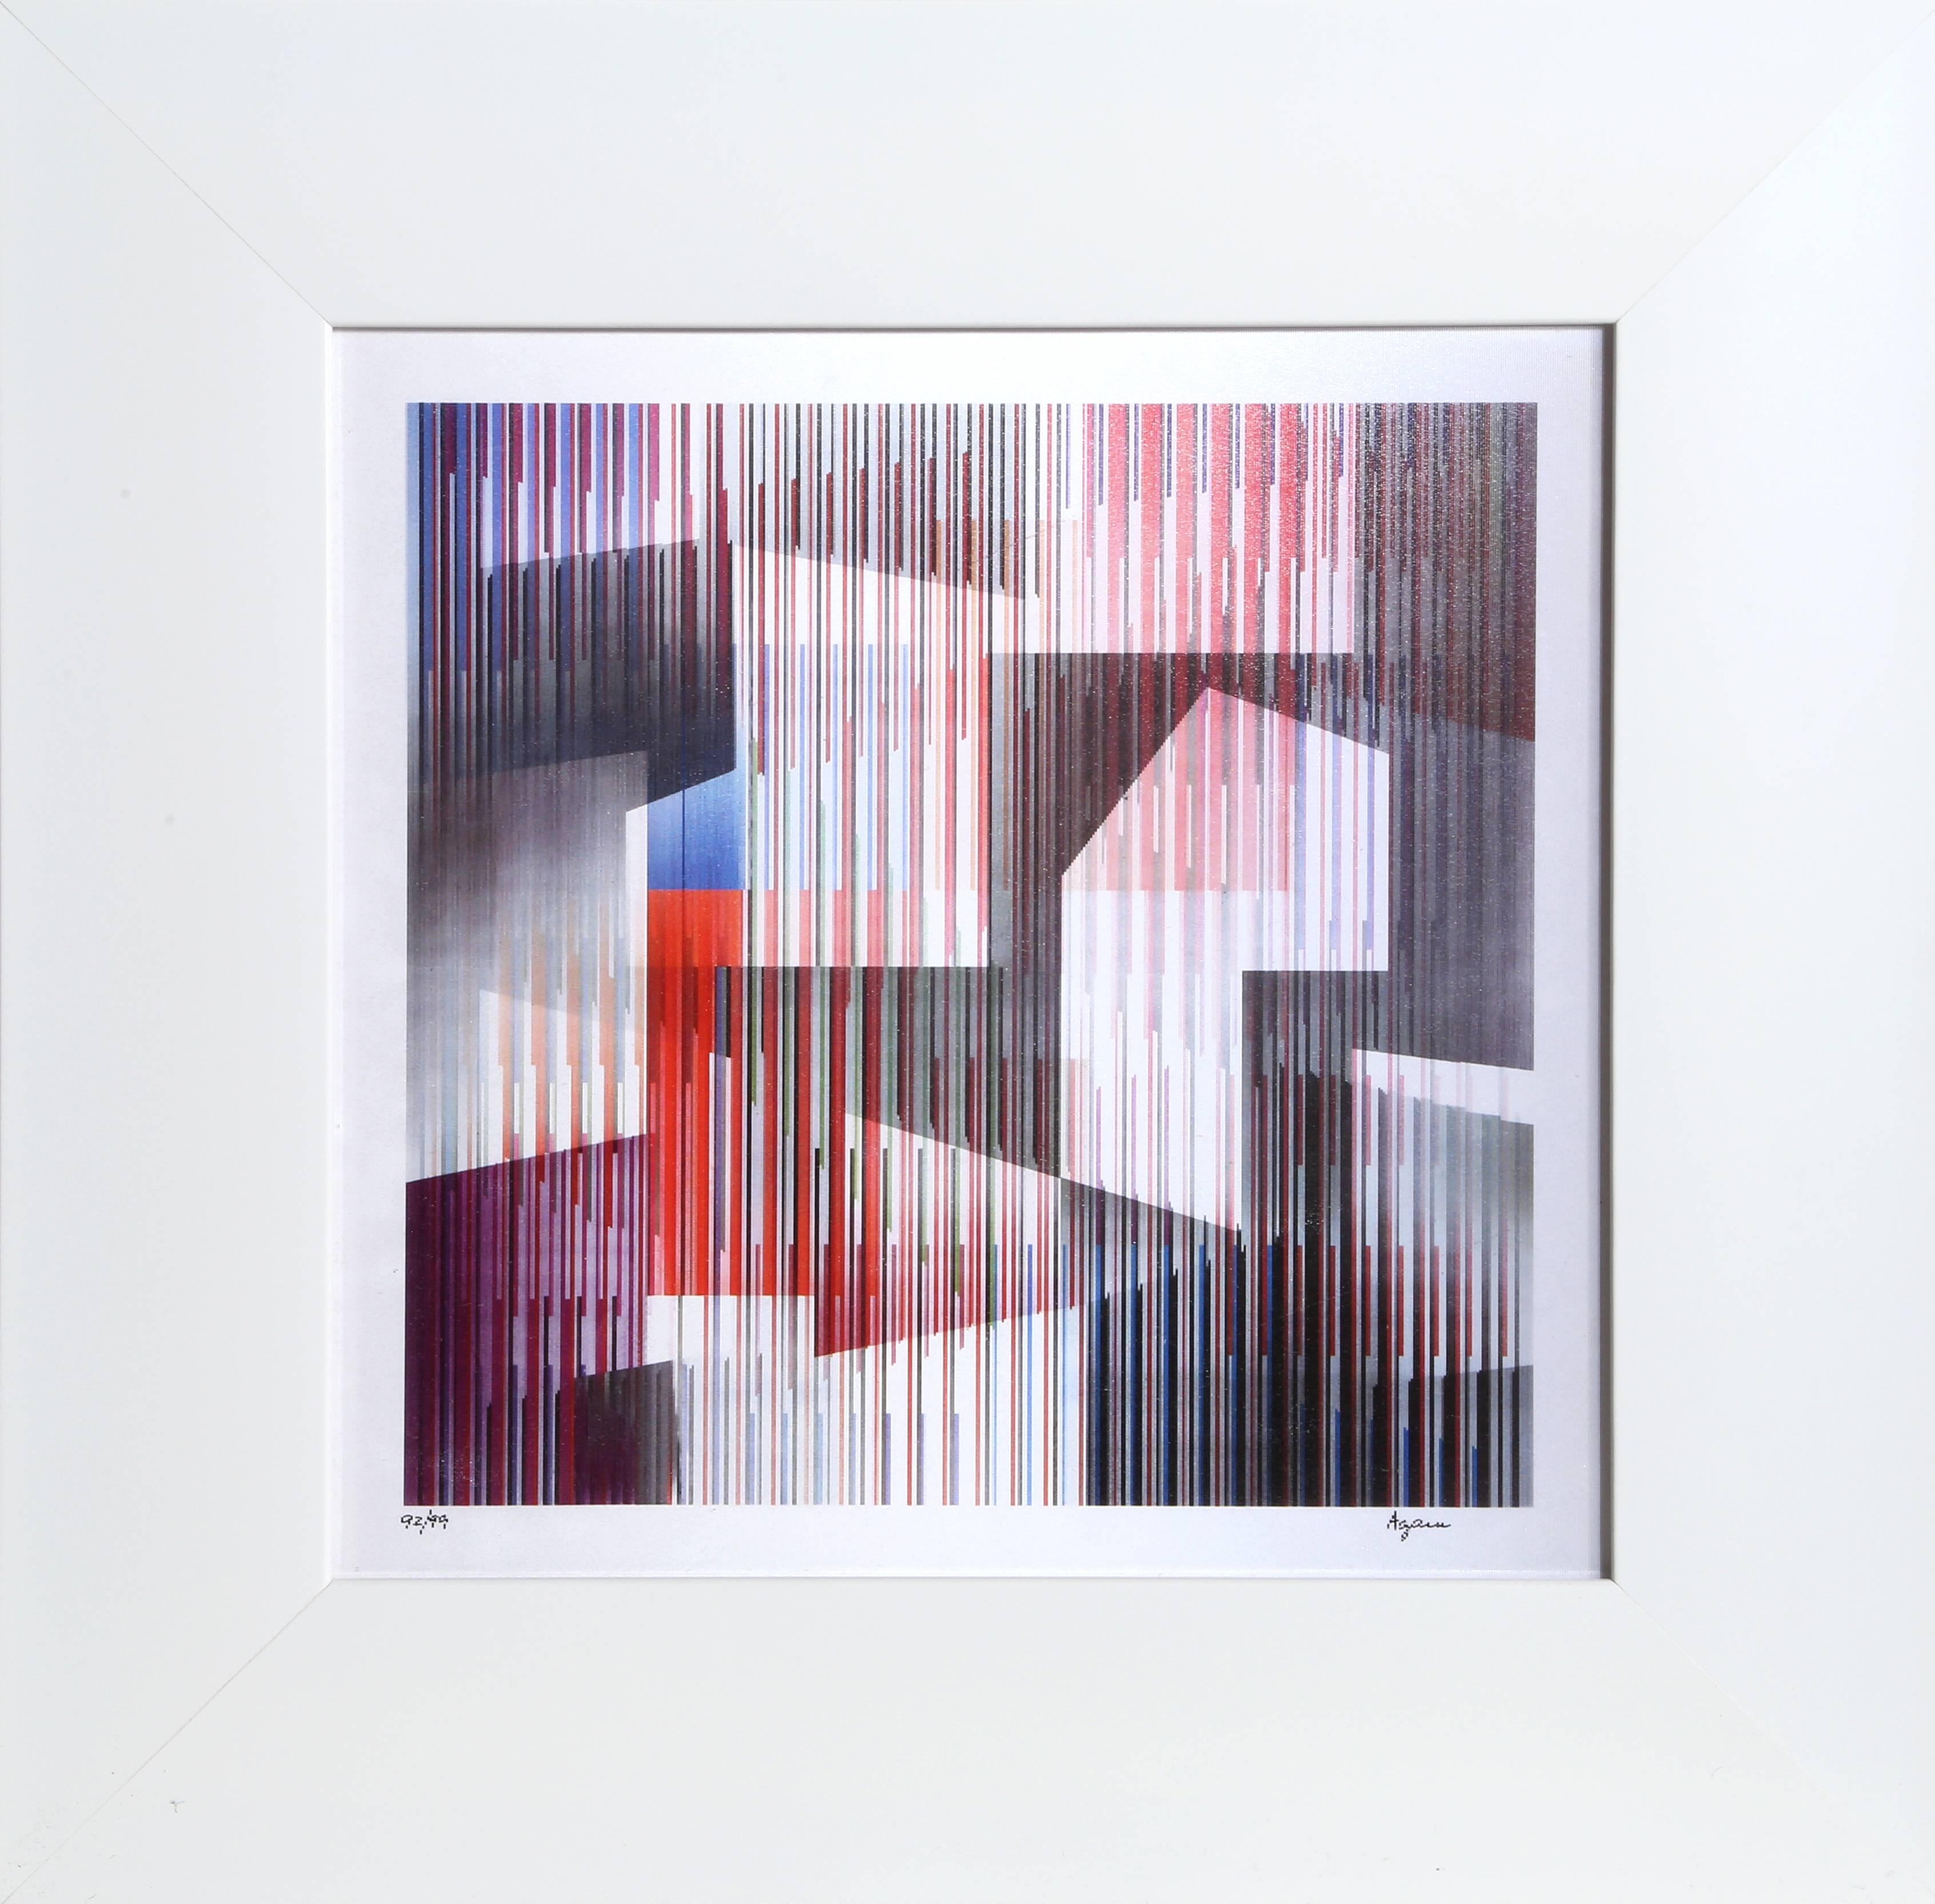 Agamograph no. 17, Abstract Geometric Op Art Lenticular by Yaacov Agam